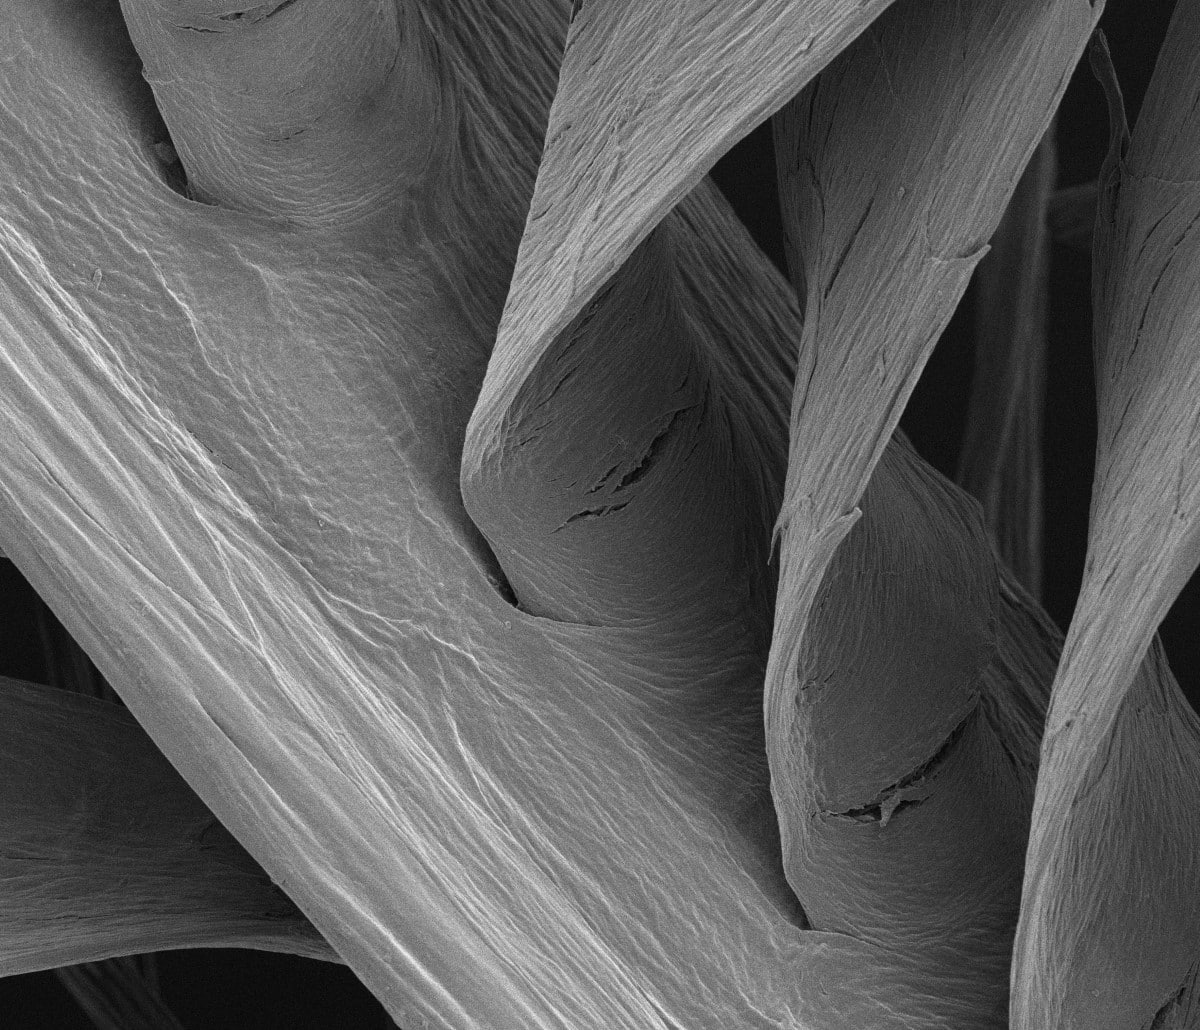 Close up looks at a starling feather